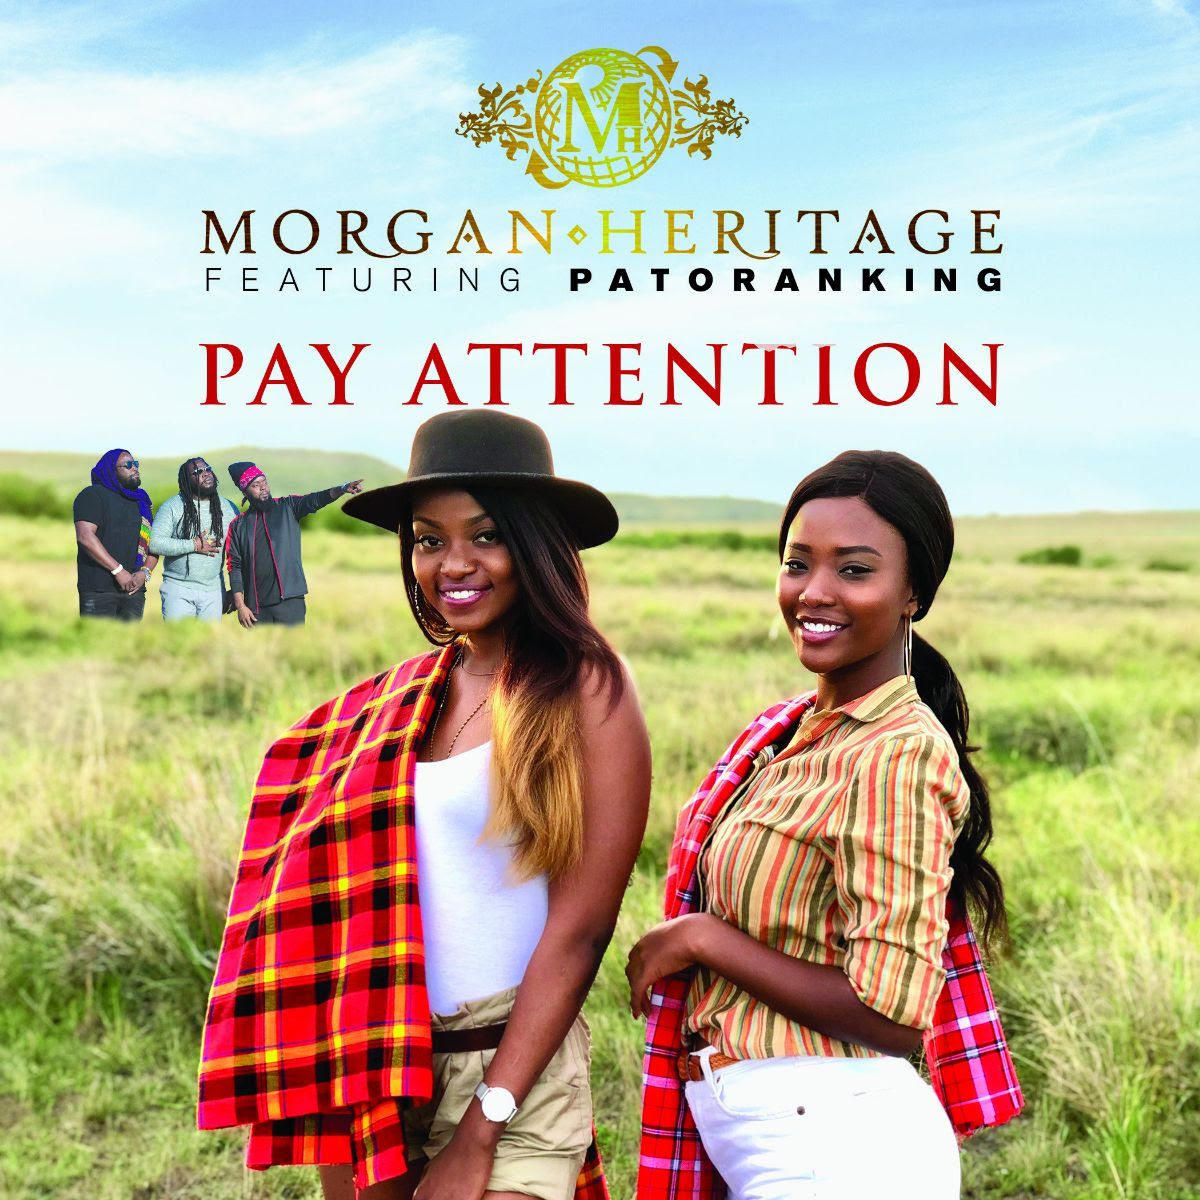 Morgan Heritage drops amazing teasers of behind the scenes of new video “Pay Attention” with Patoranking